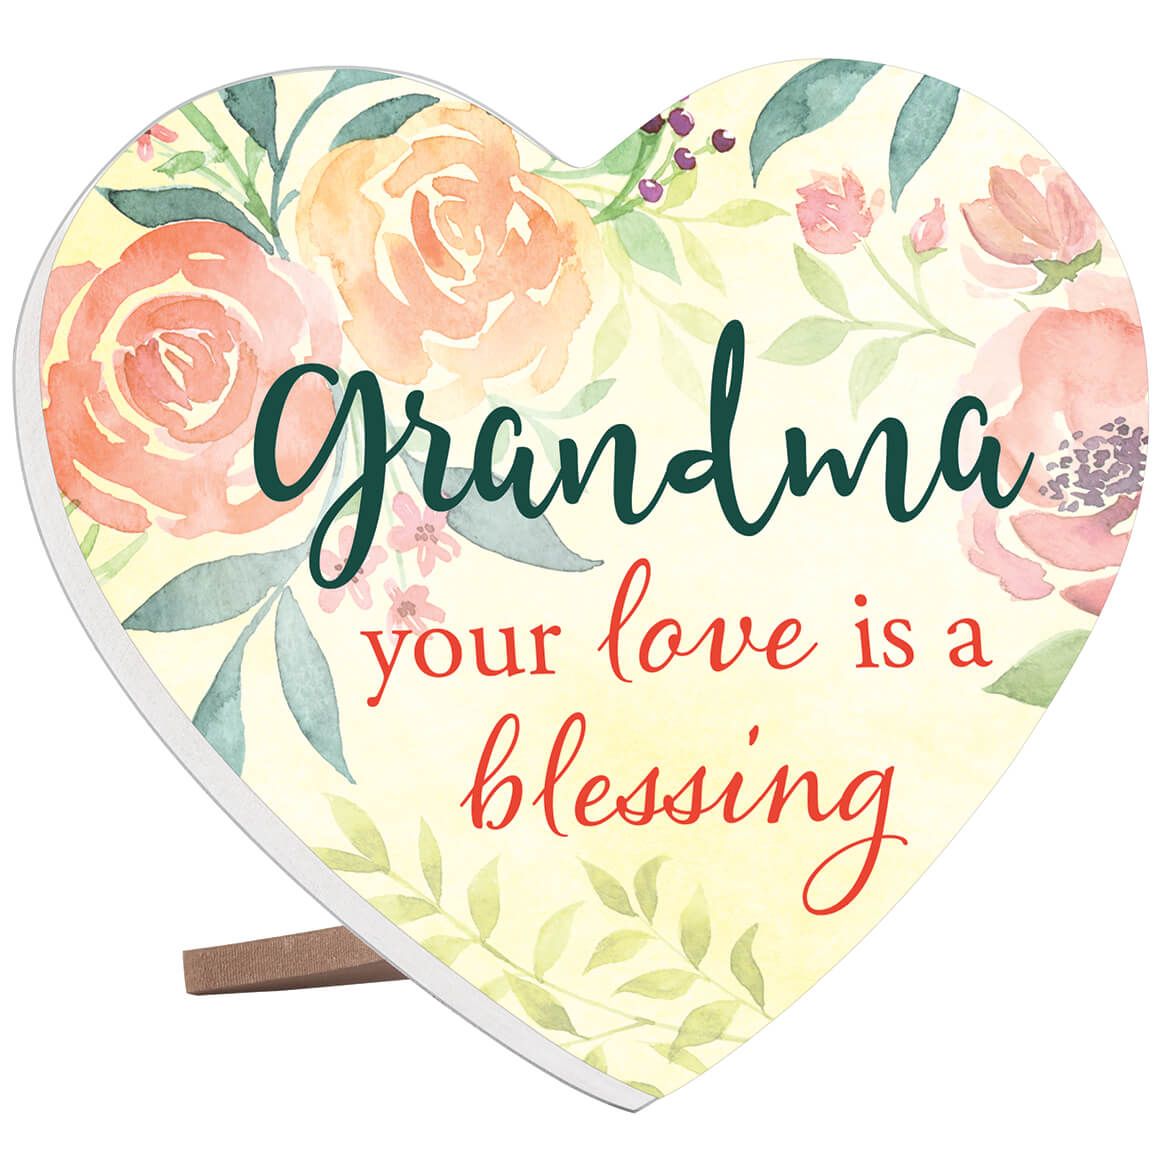 Personalized "Your Love is a Blessing" Heart Table Sitter + '-' + 373656